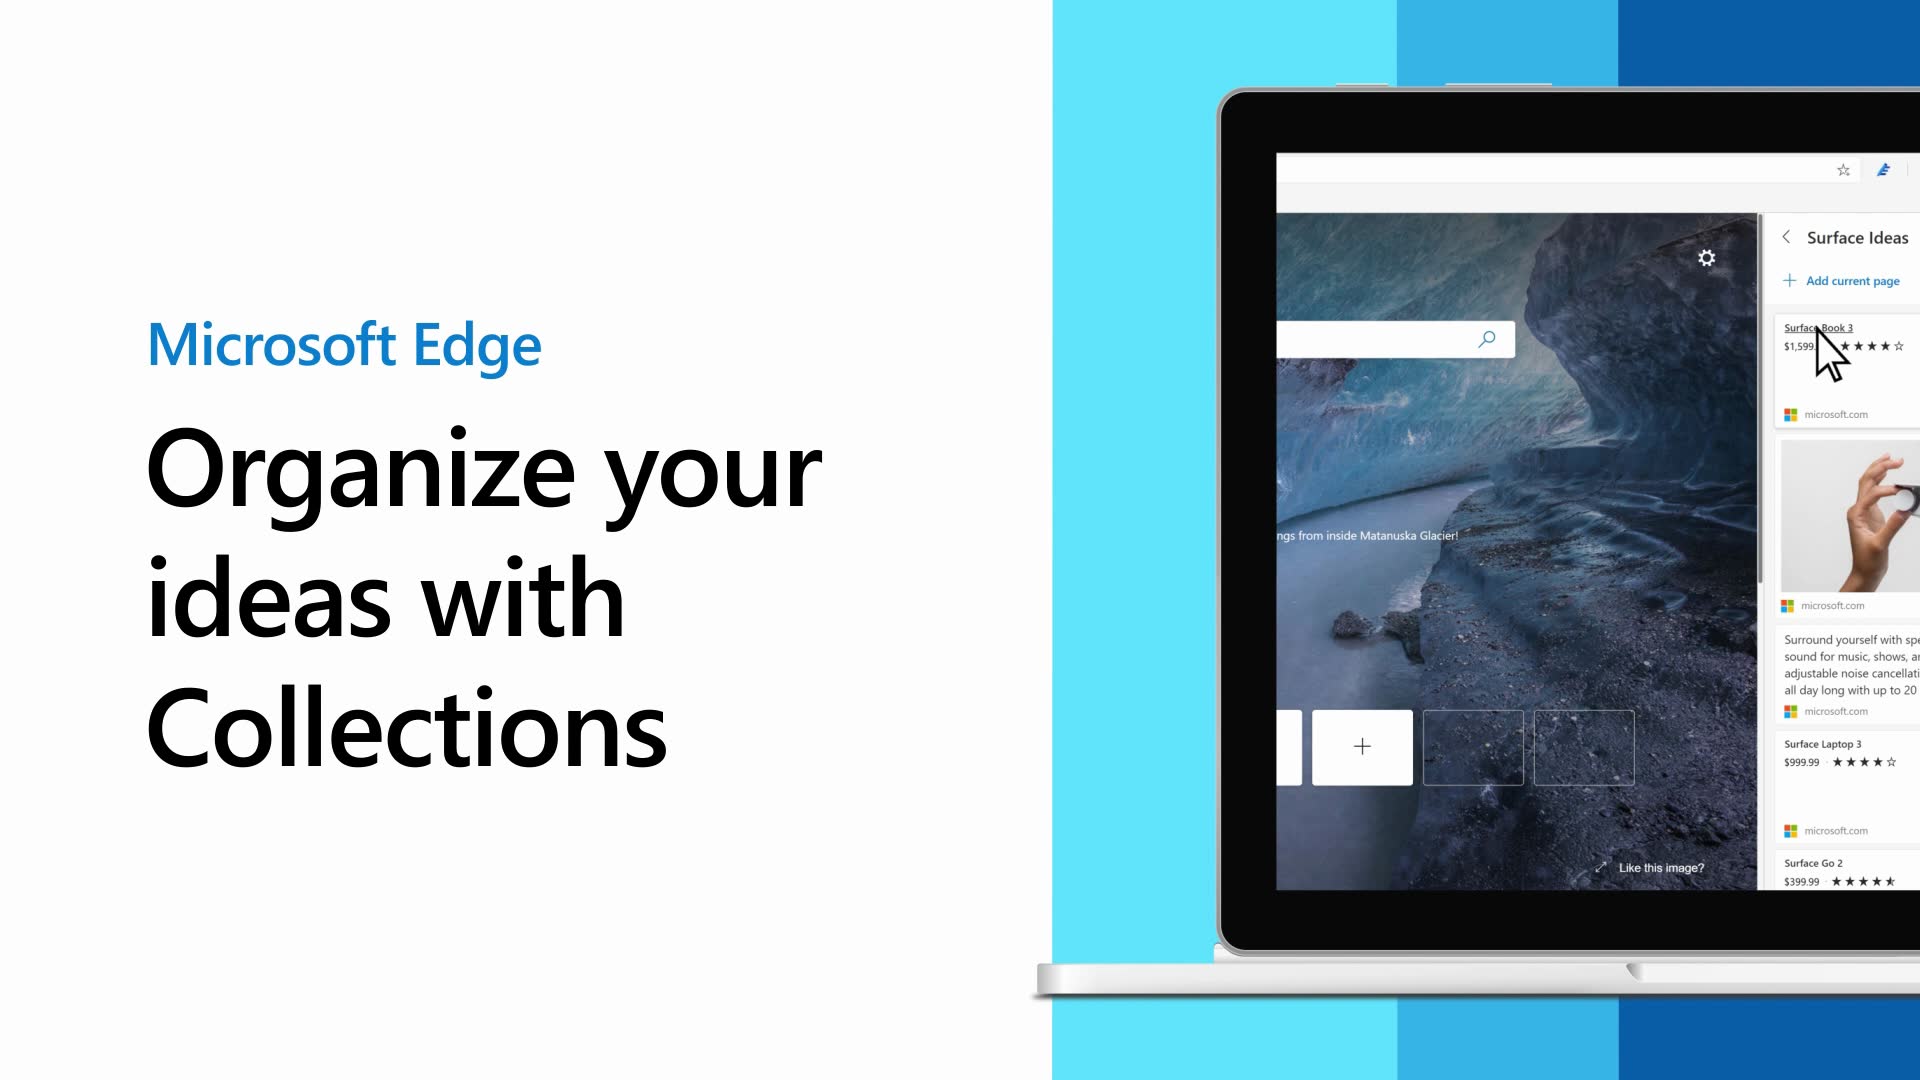 Introducing Buy now, pay later in Microsoft Edge - Microsoft Community Hub